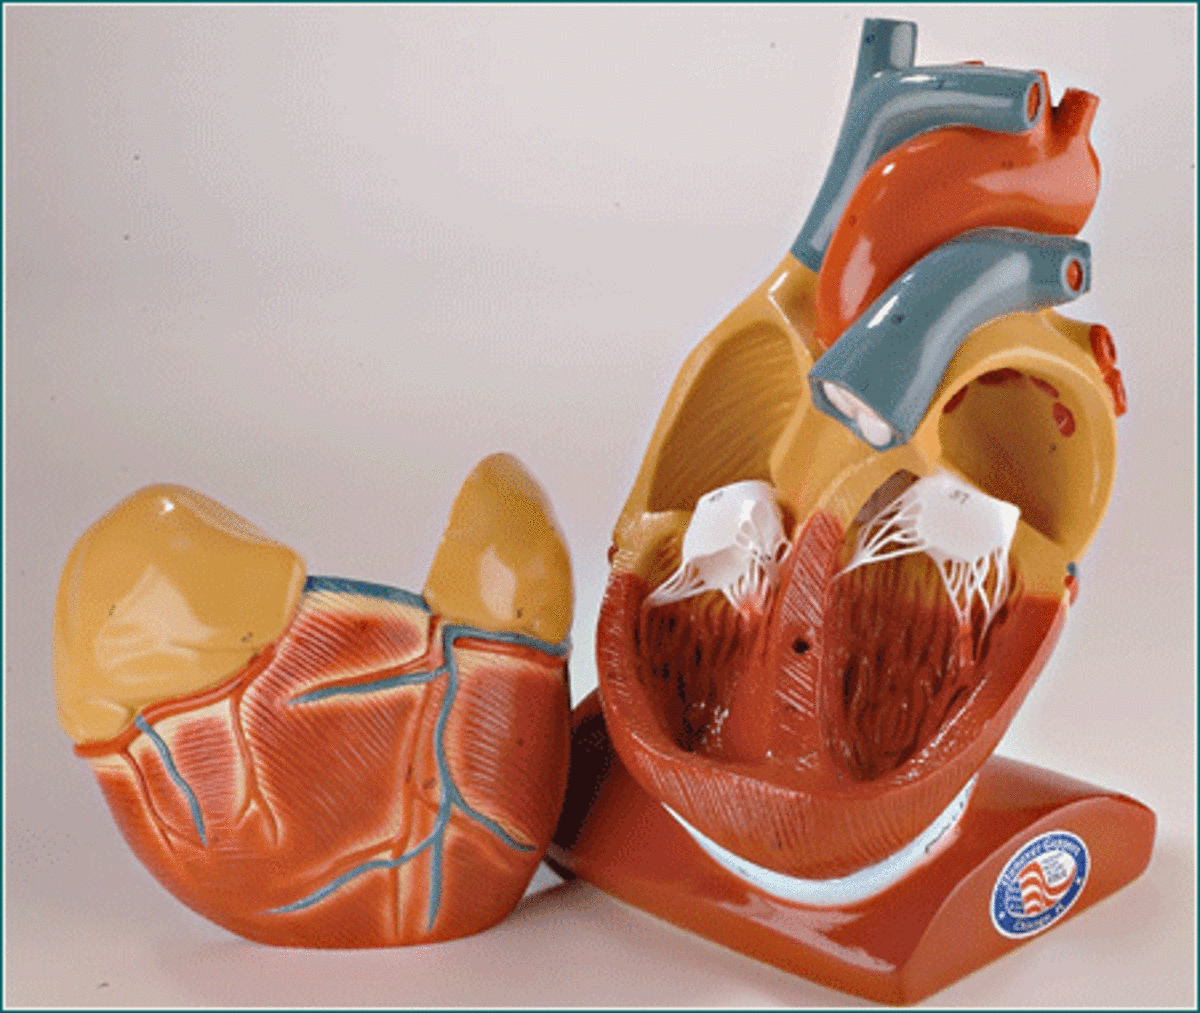 Model showing the 4 chambers of the heart as well as valves.